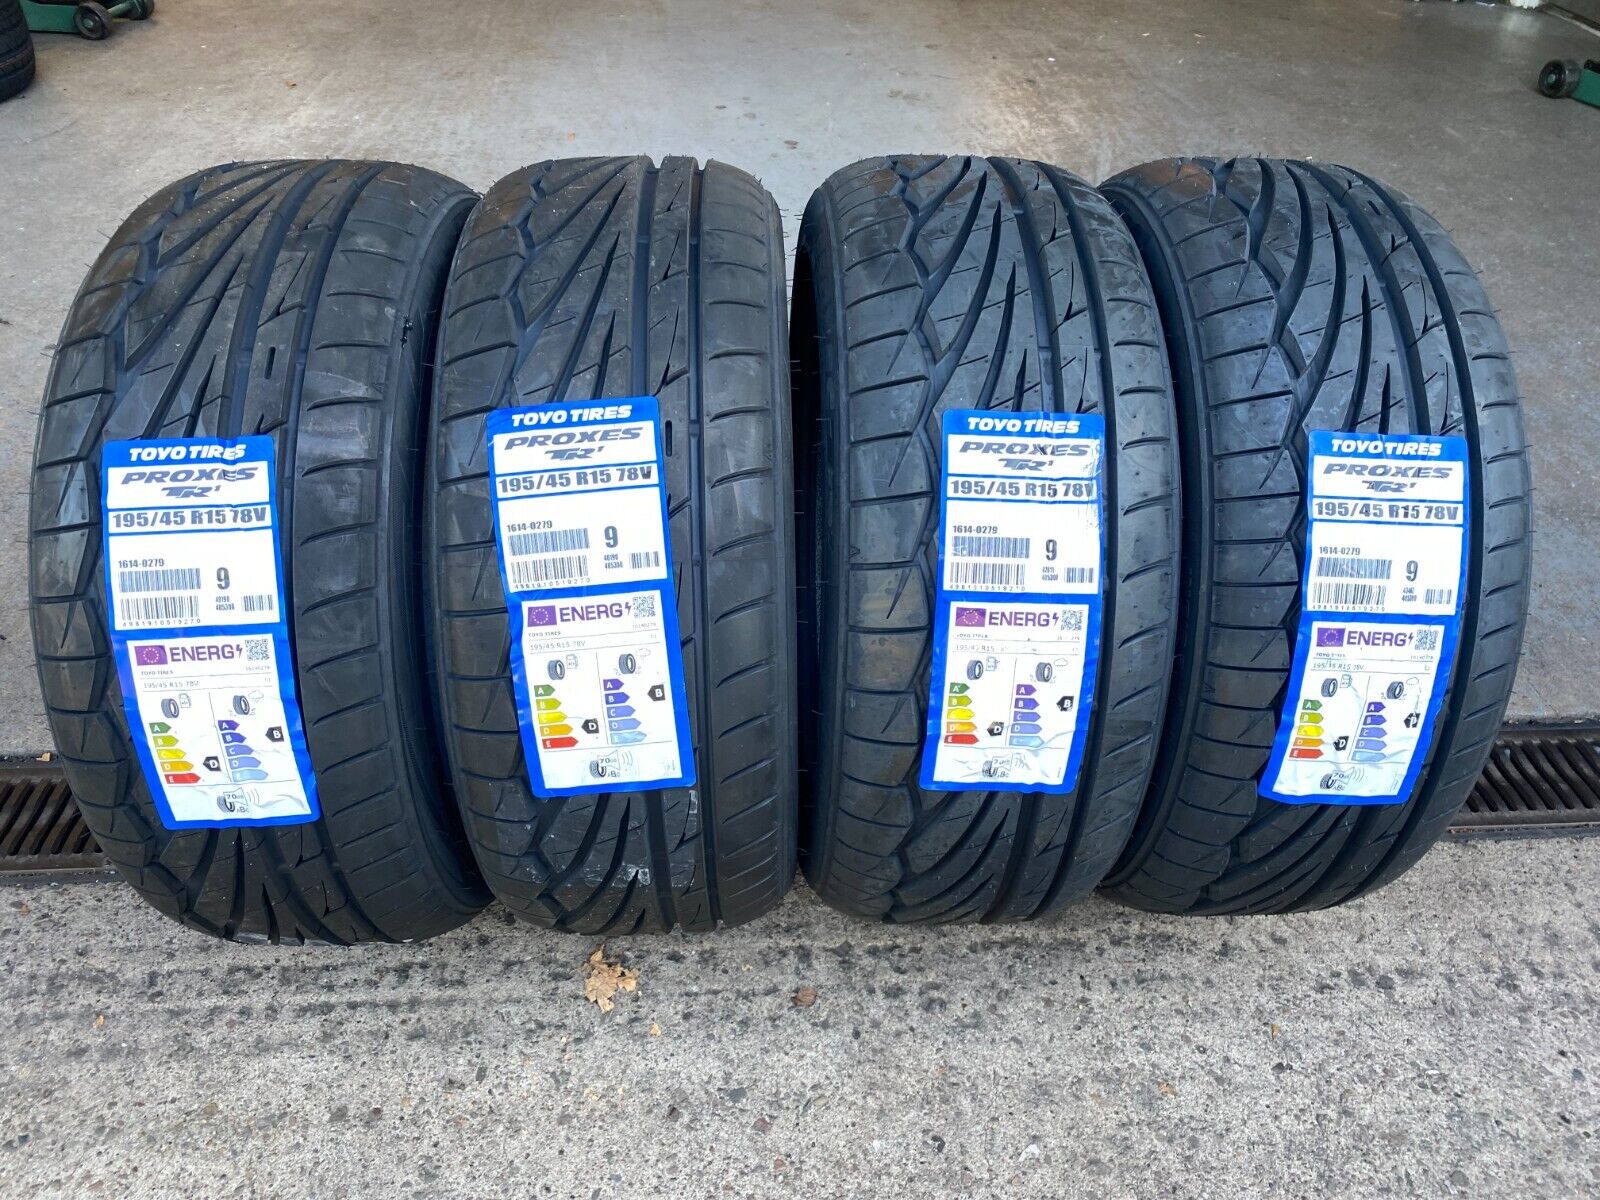 ROAD X4 | TOYO TYRES 78V TR-1 15 QUALITY 195 45 TRACK TOP PROXES DAY/ 195/45R15 eBay